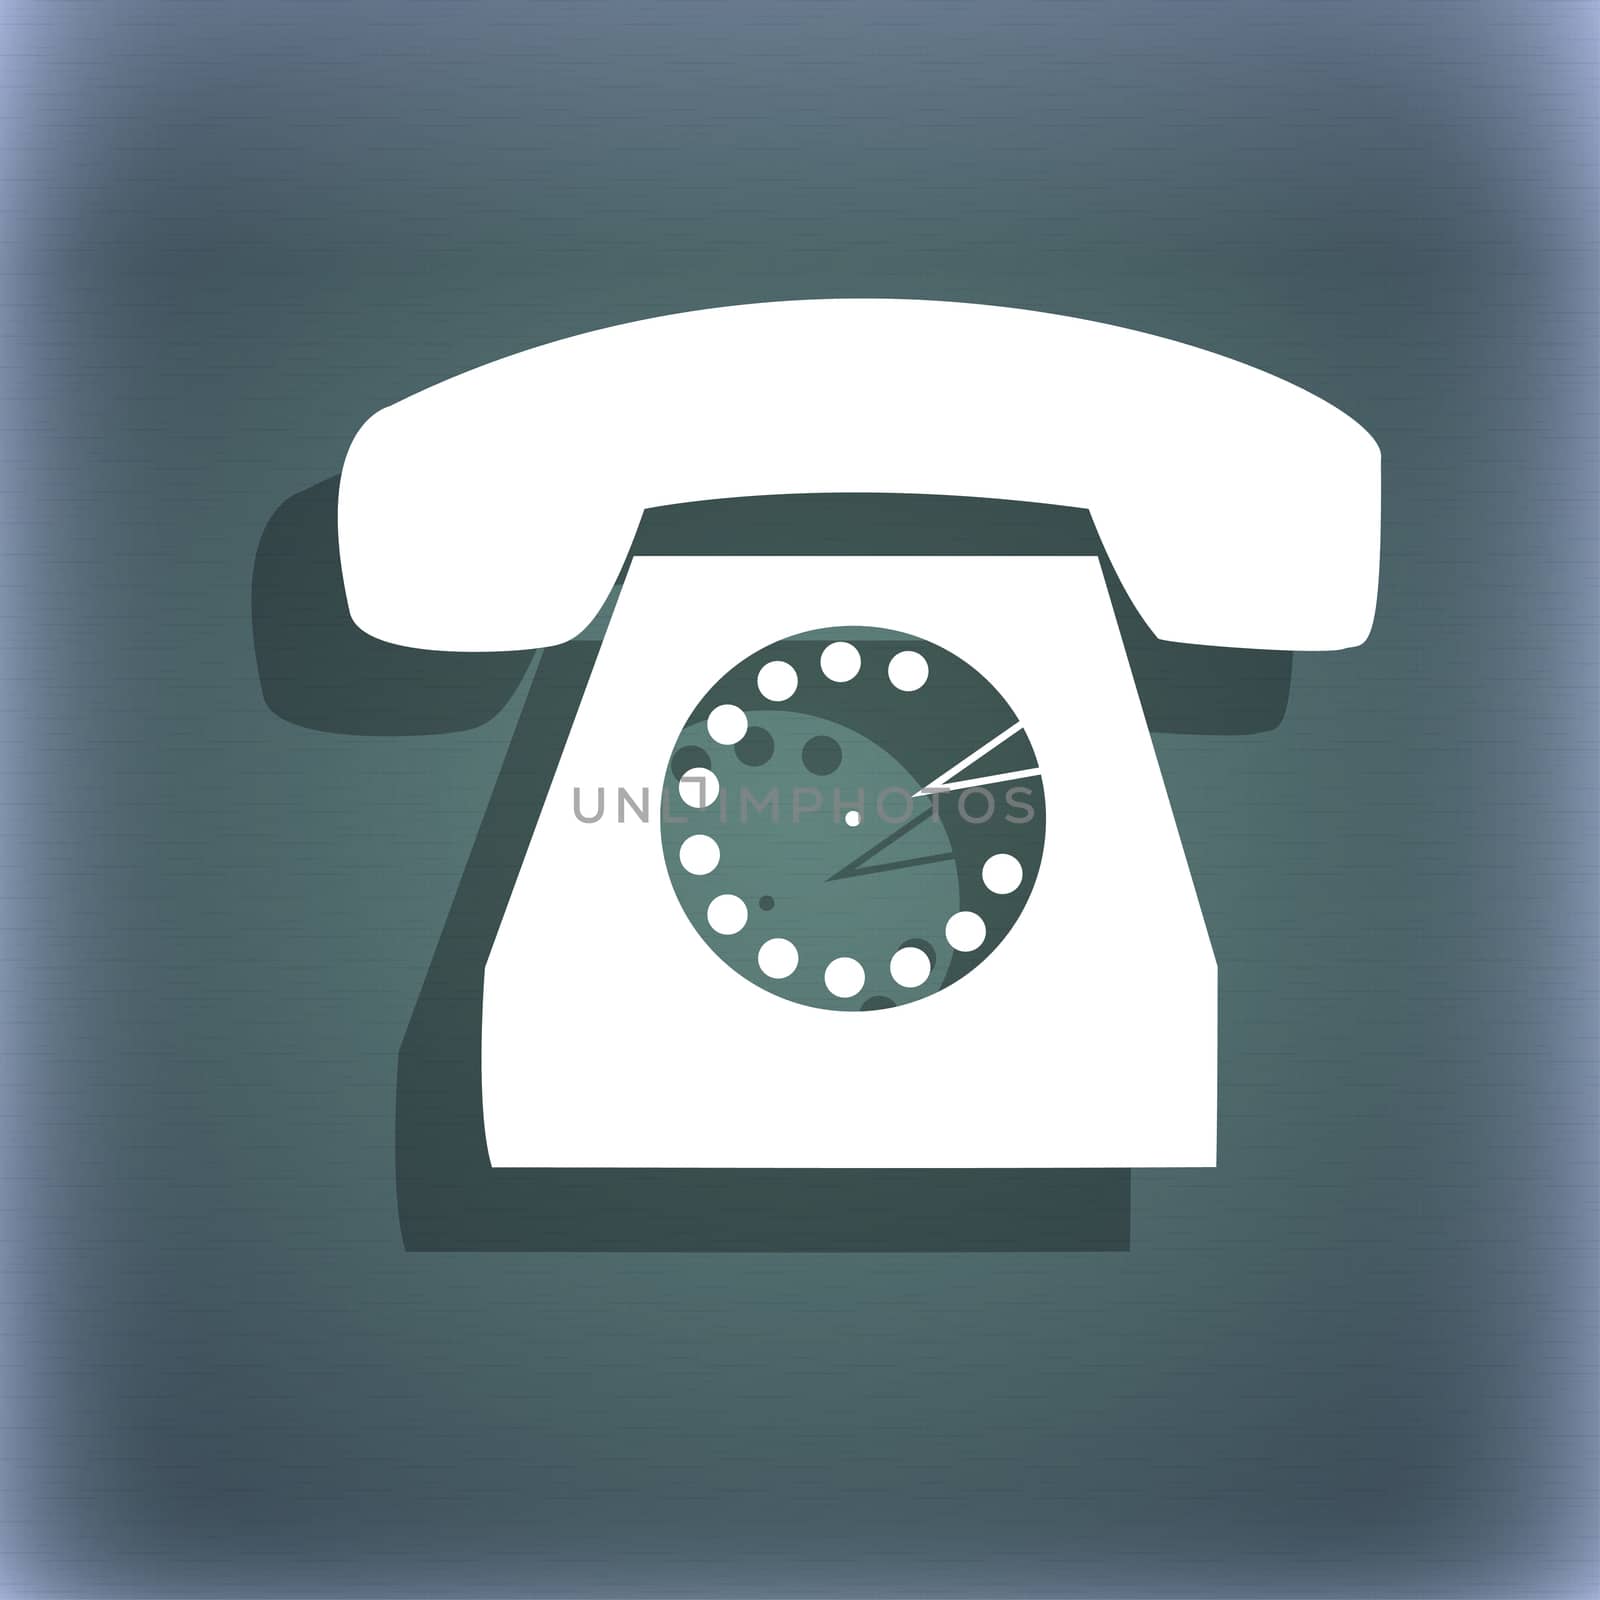 Retro telephone icon symbol. On the blue-green abstract background with shadow and space for your text. illustration